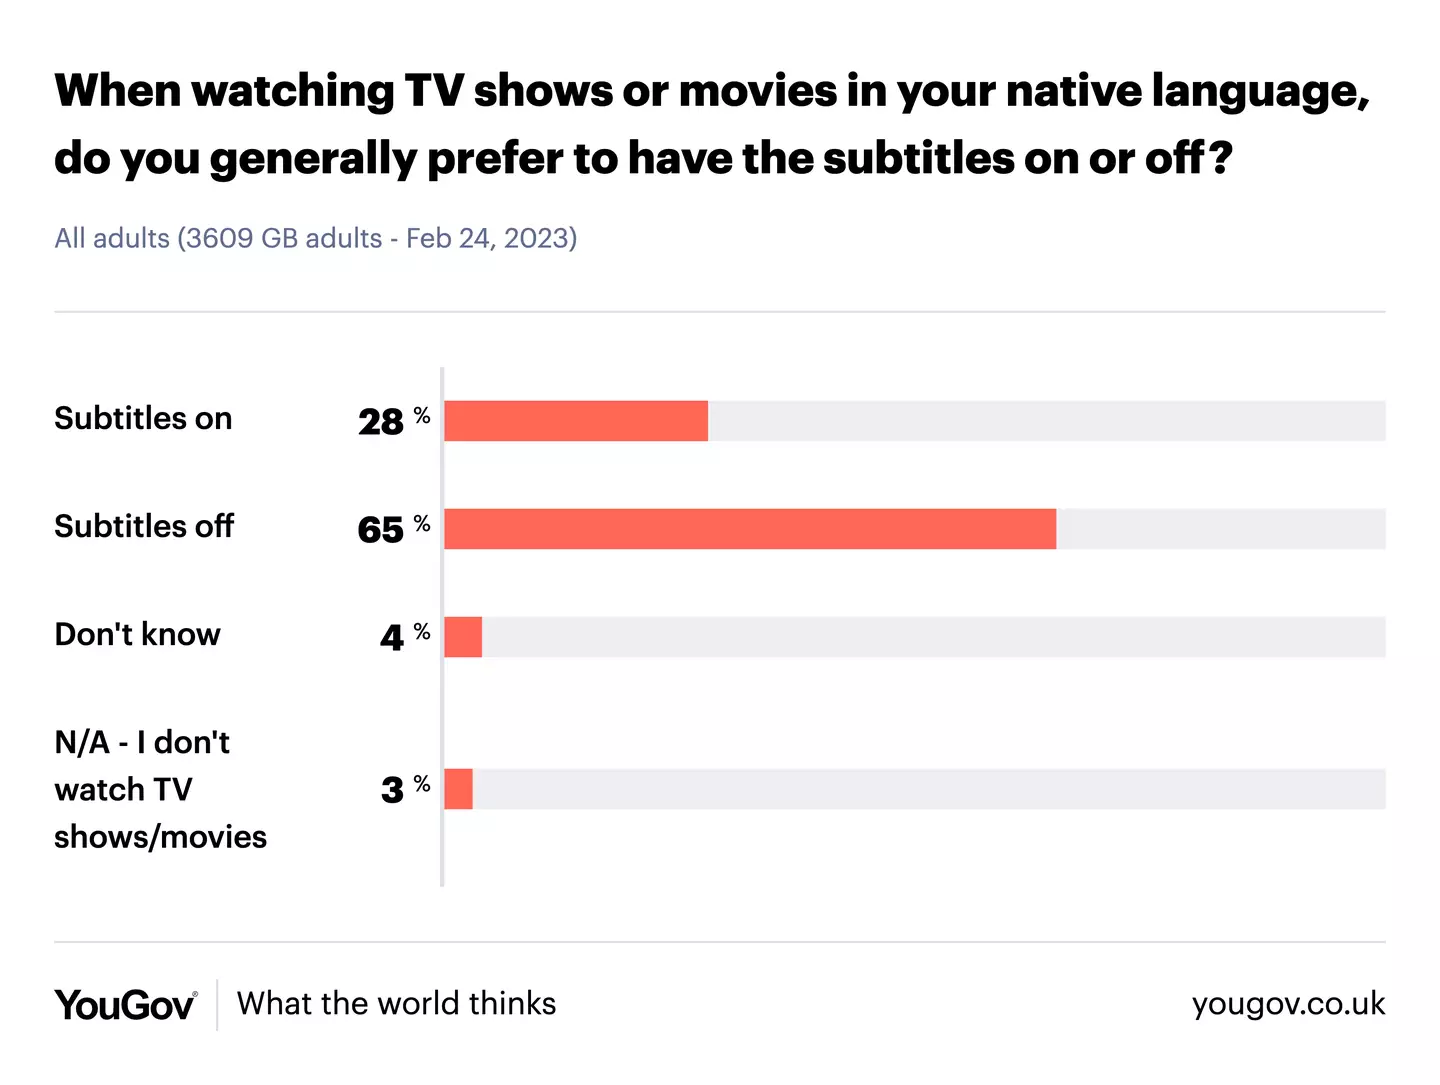 61 percent of 18-24-year-olds surveyed by YouGov use subtitles when watching TV or a movie in their native language.